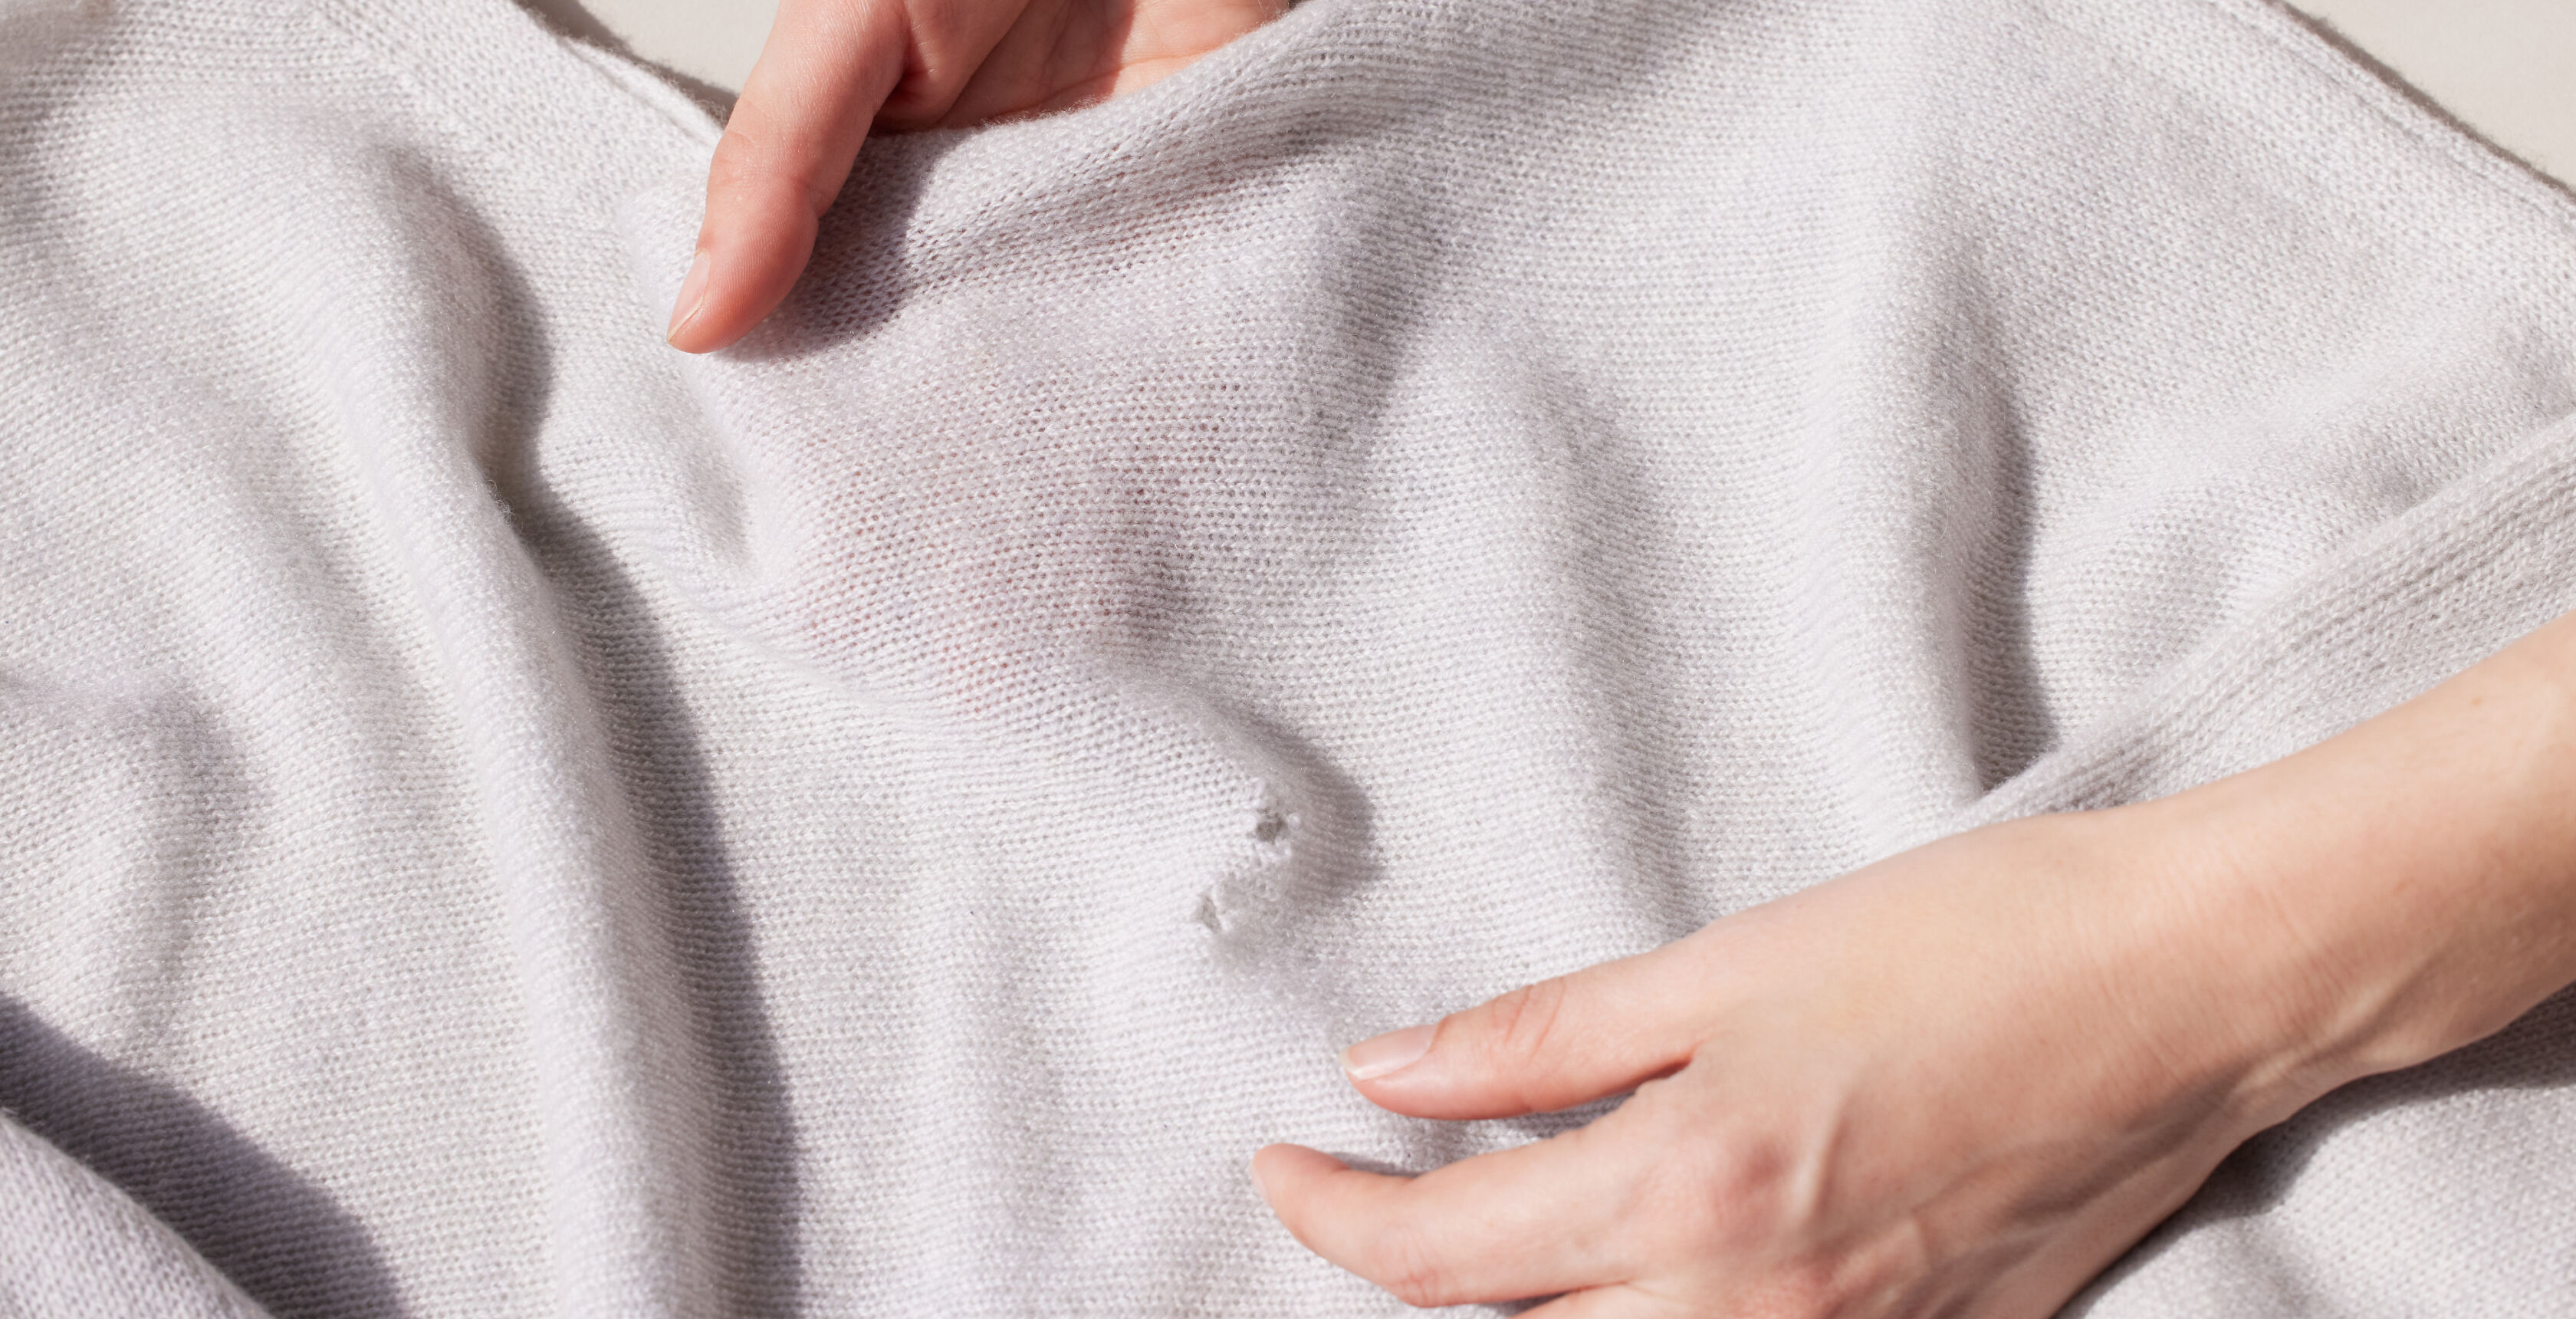 Hands holding sweater with moth holes.